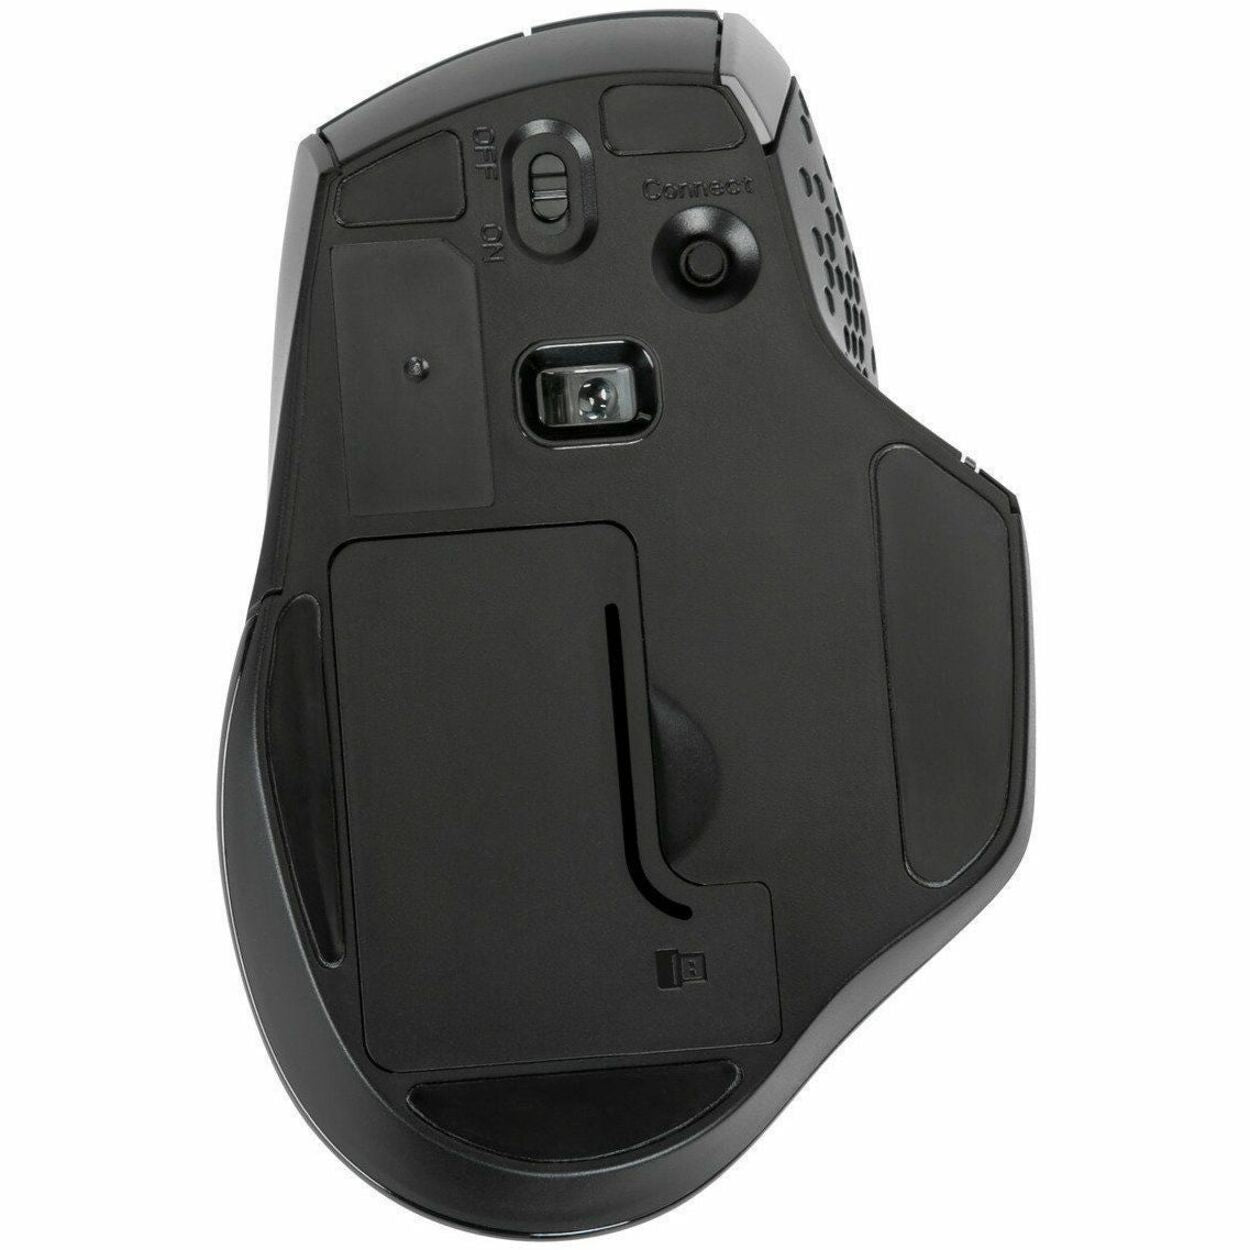 Targus AMW584GL Antimicrobial Ergo Wireless Mouse, 2.4 GHz, 1600 dpi, 7 Buttons